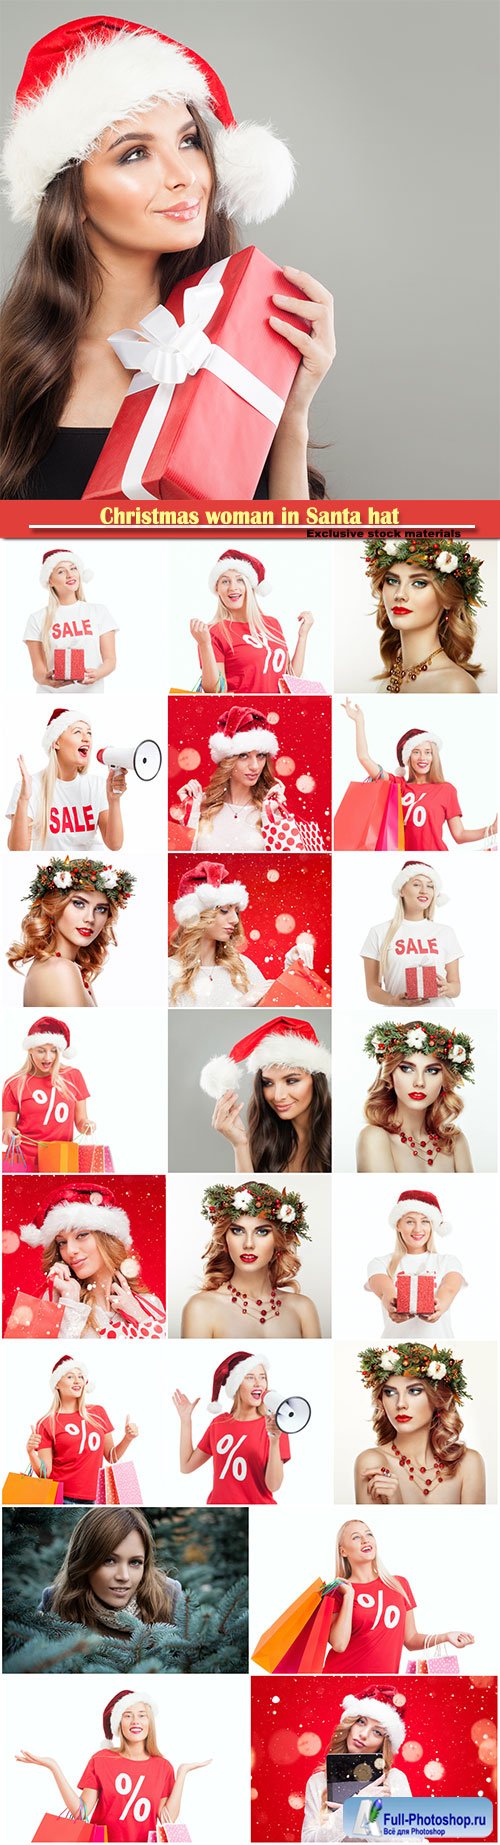 Christmas woman in Santa hat, woman with Christmas wreath